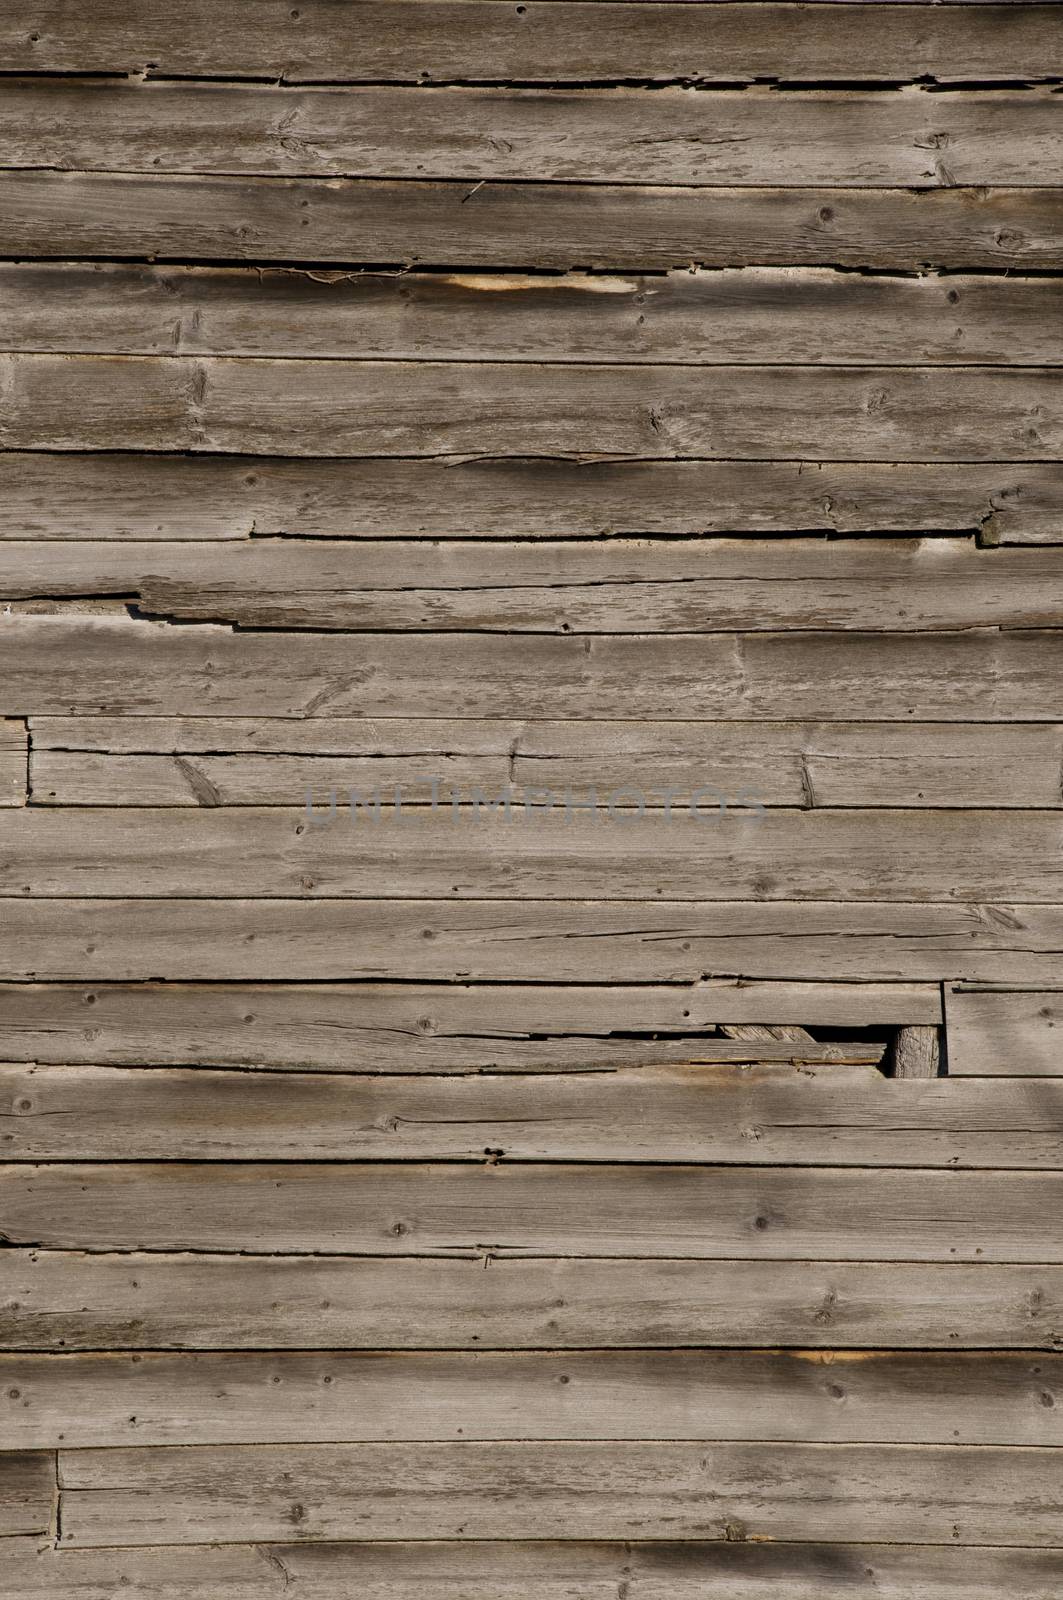 Exterior weathered wooden wall with unpainted planks